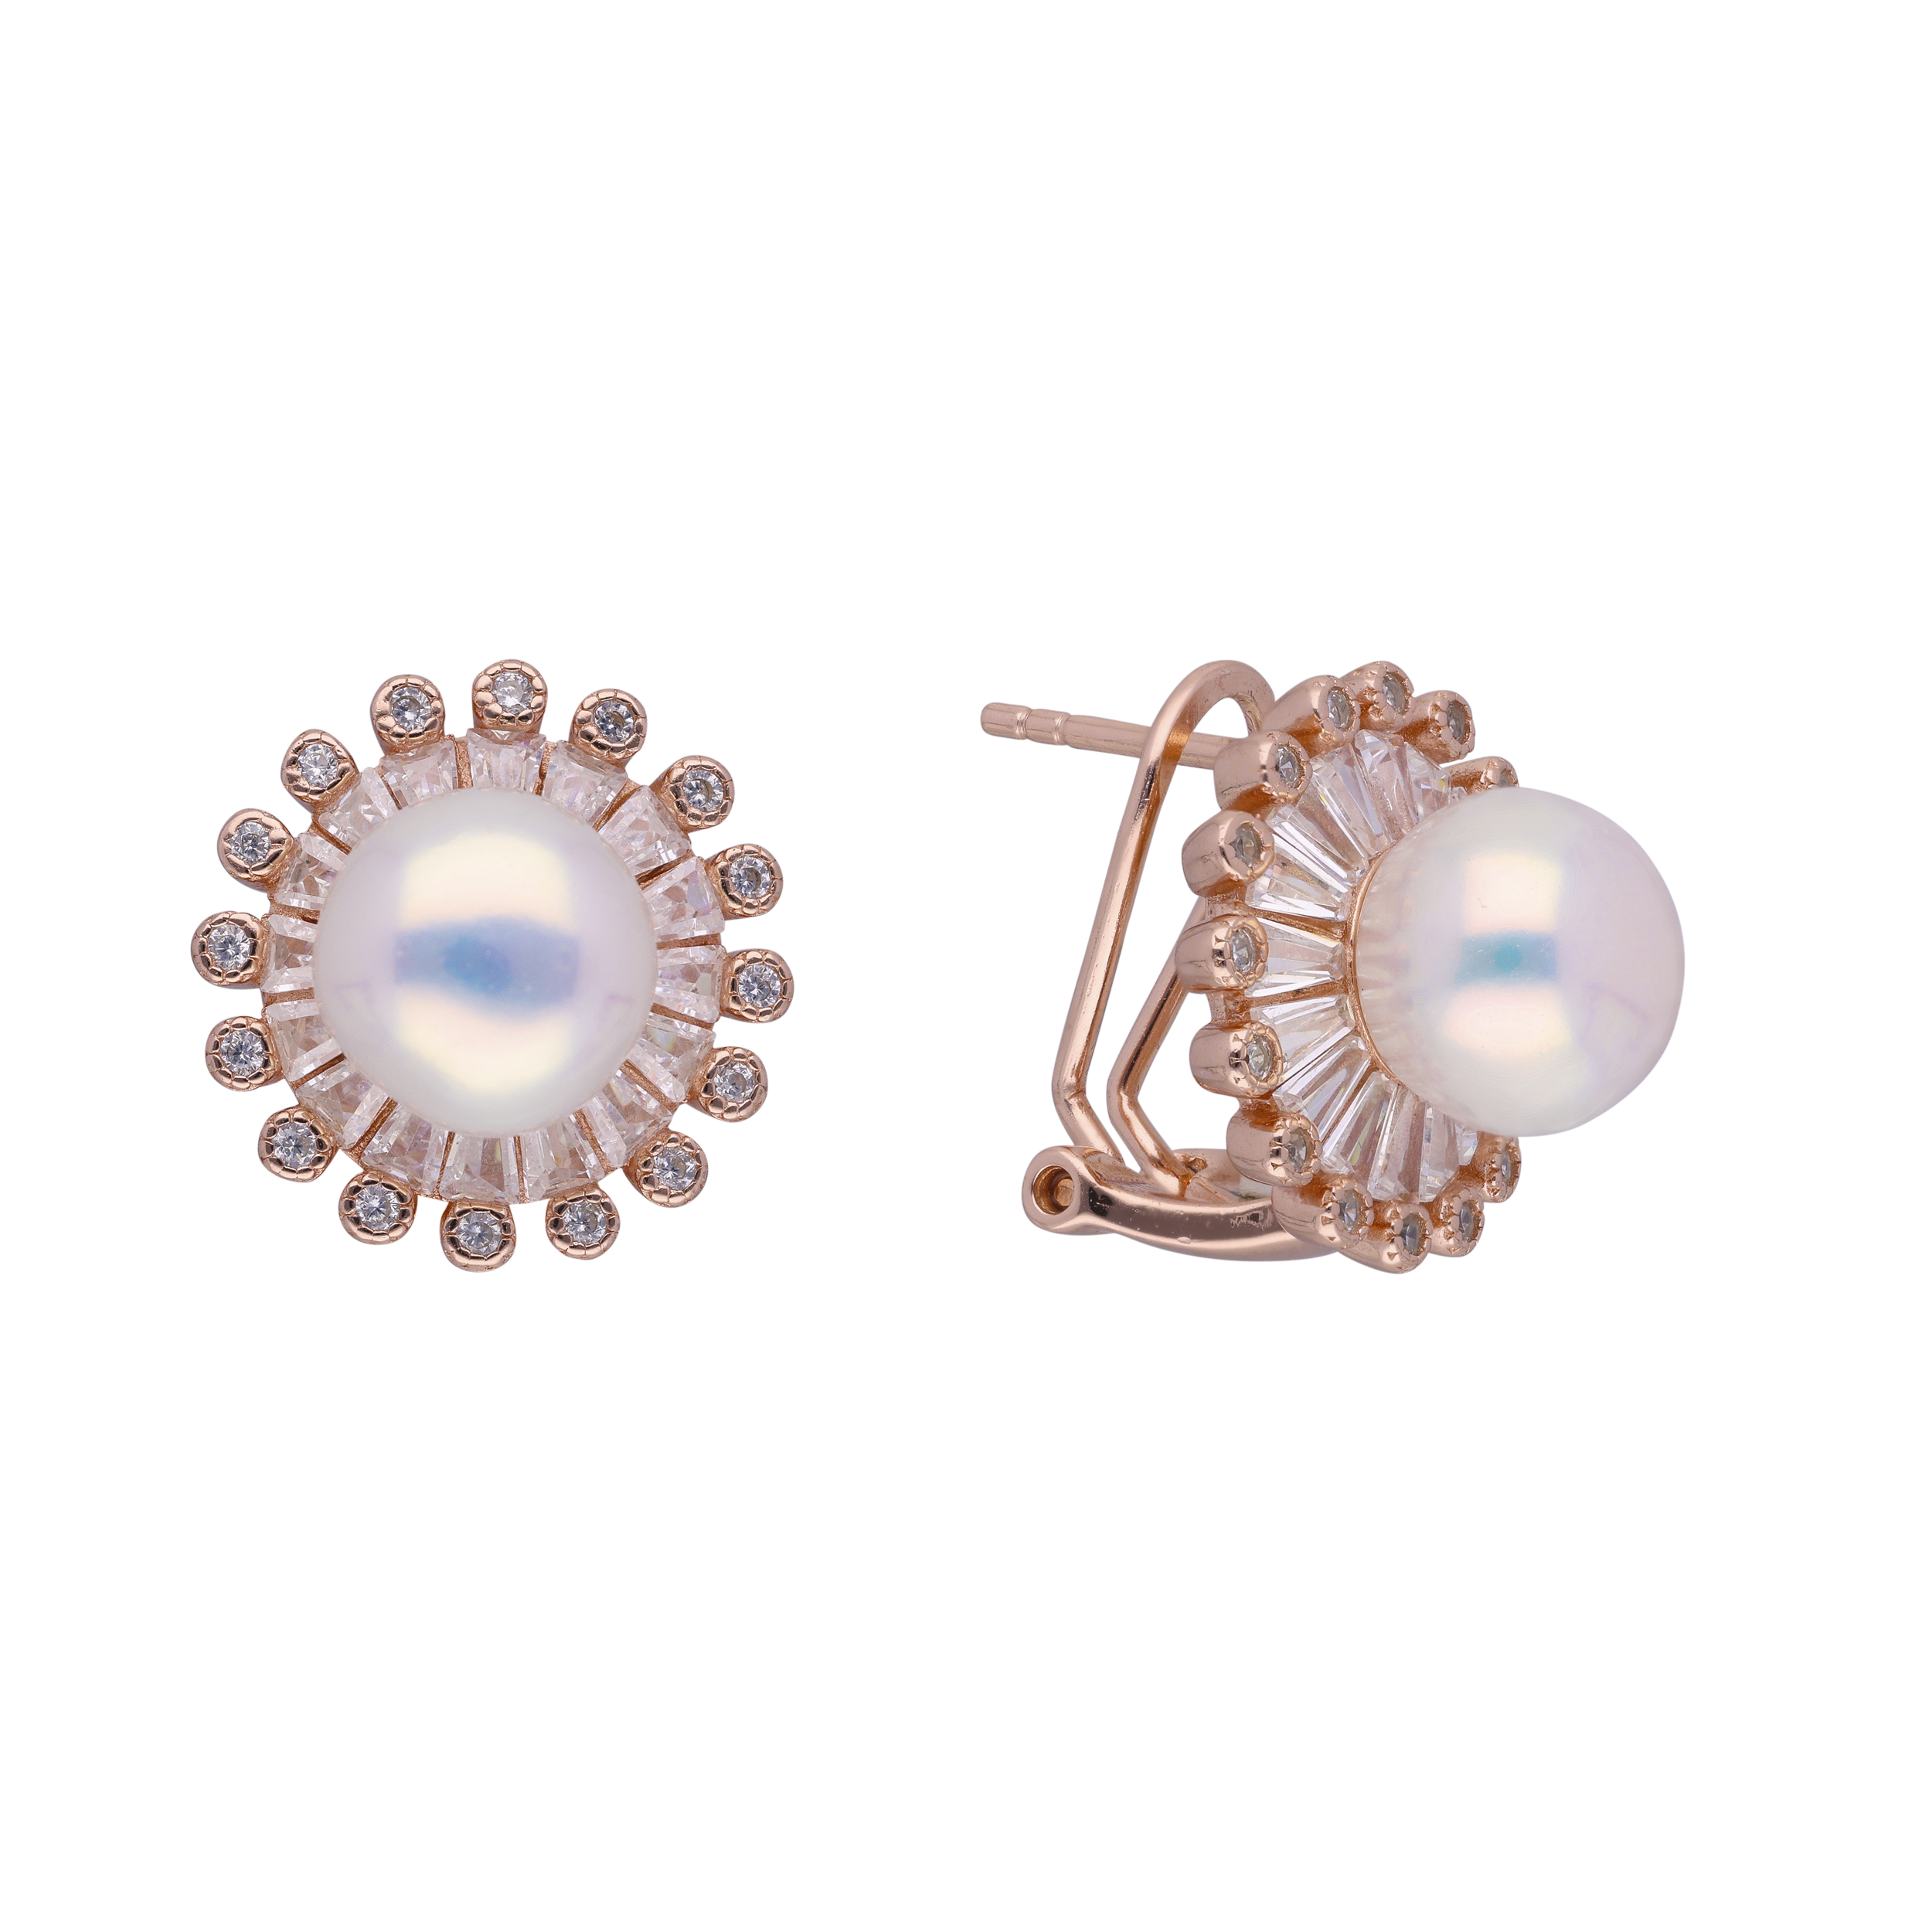 Pearl Radiance: Sterling Silver Earstuds with Cubic Zirconia and Pearl Accents | SKU : 0019891910, 0003109526, 0019891934, 0003109489